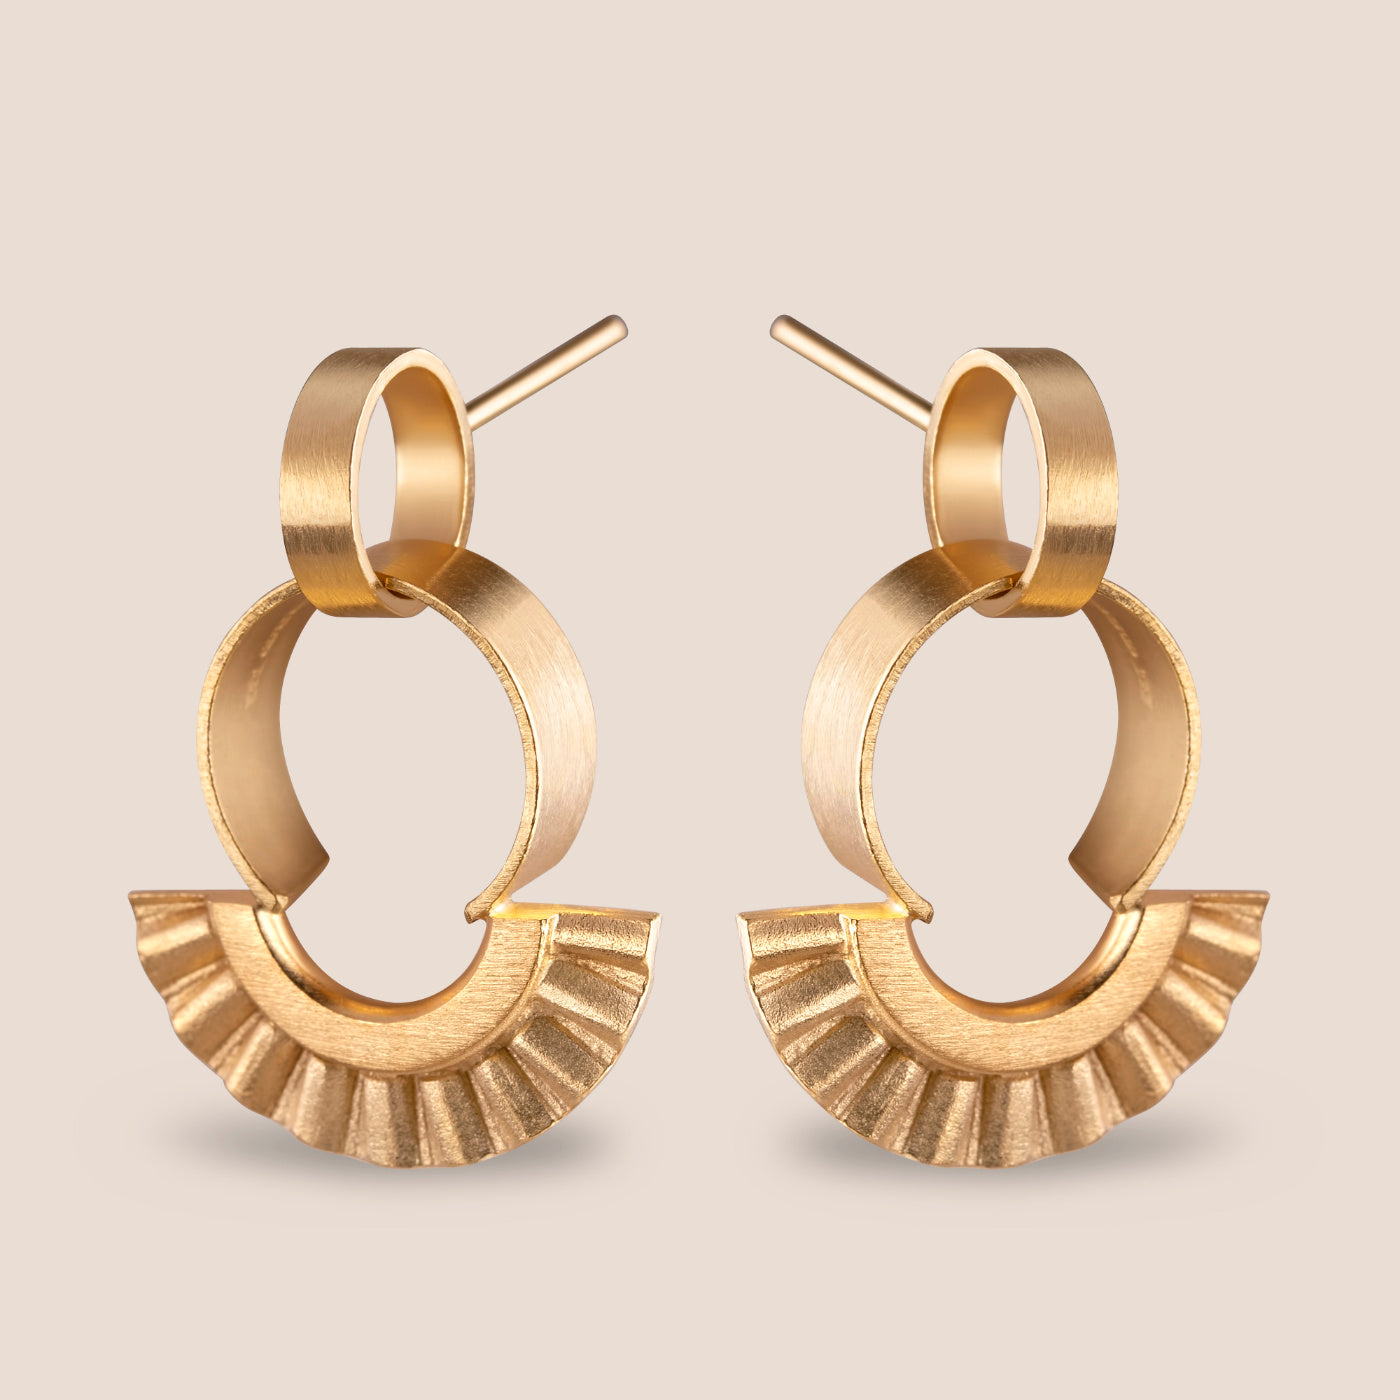 NEW - Lucky Sunray Earrings - Gold Plated